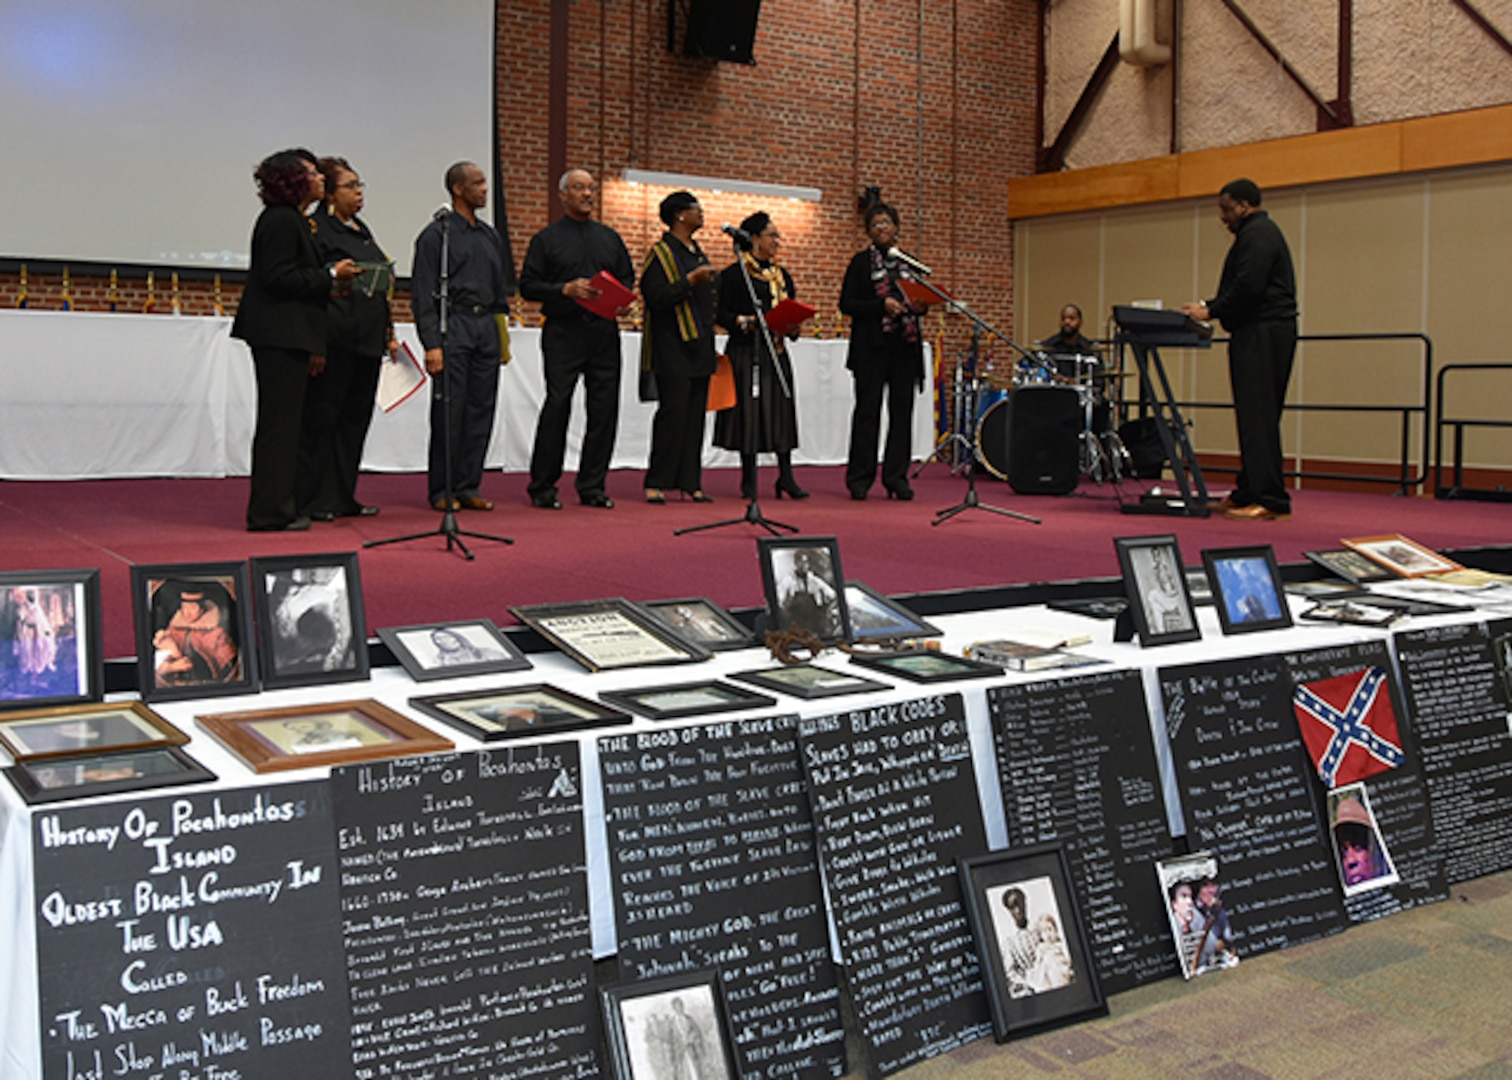 The Bellwood Choir, comprised Defense Logistics Agency employees on Defense Supply Center Richmond, Virginia, perform hymns during a Black History Month Observance Feb. 25, 2016 held on the center.  In front of the stage are historical displays depicting the history of the tragedies and triumphs of African-Americans pre-and-post Civil War era, along with historical information on Pocahontas Island, one of the first black communities in the United States, located on the Appomattox River in Petersburg, Virginia.  